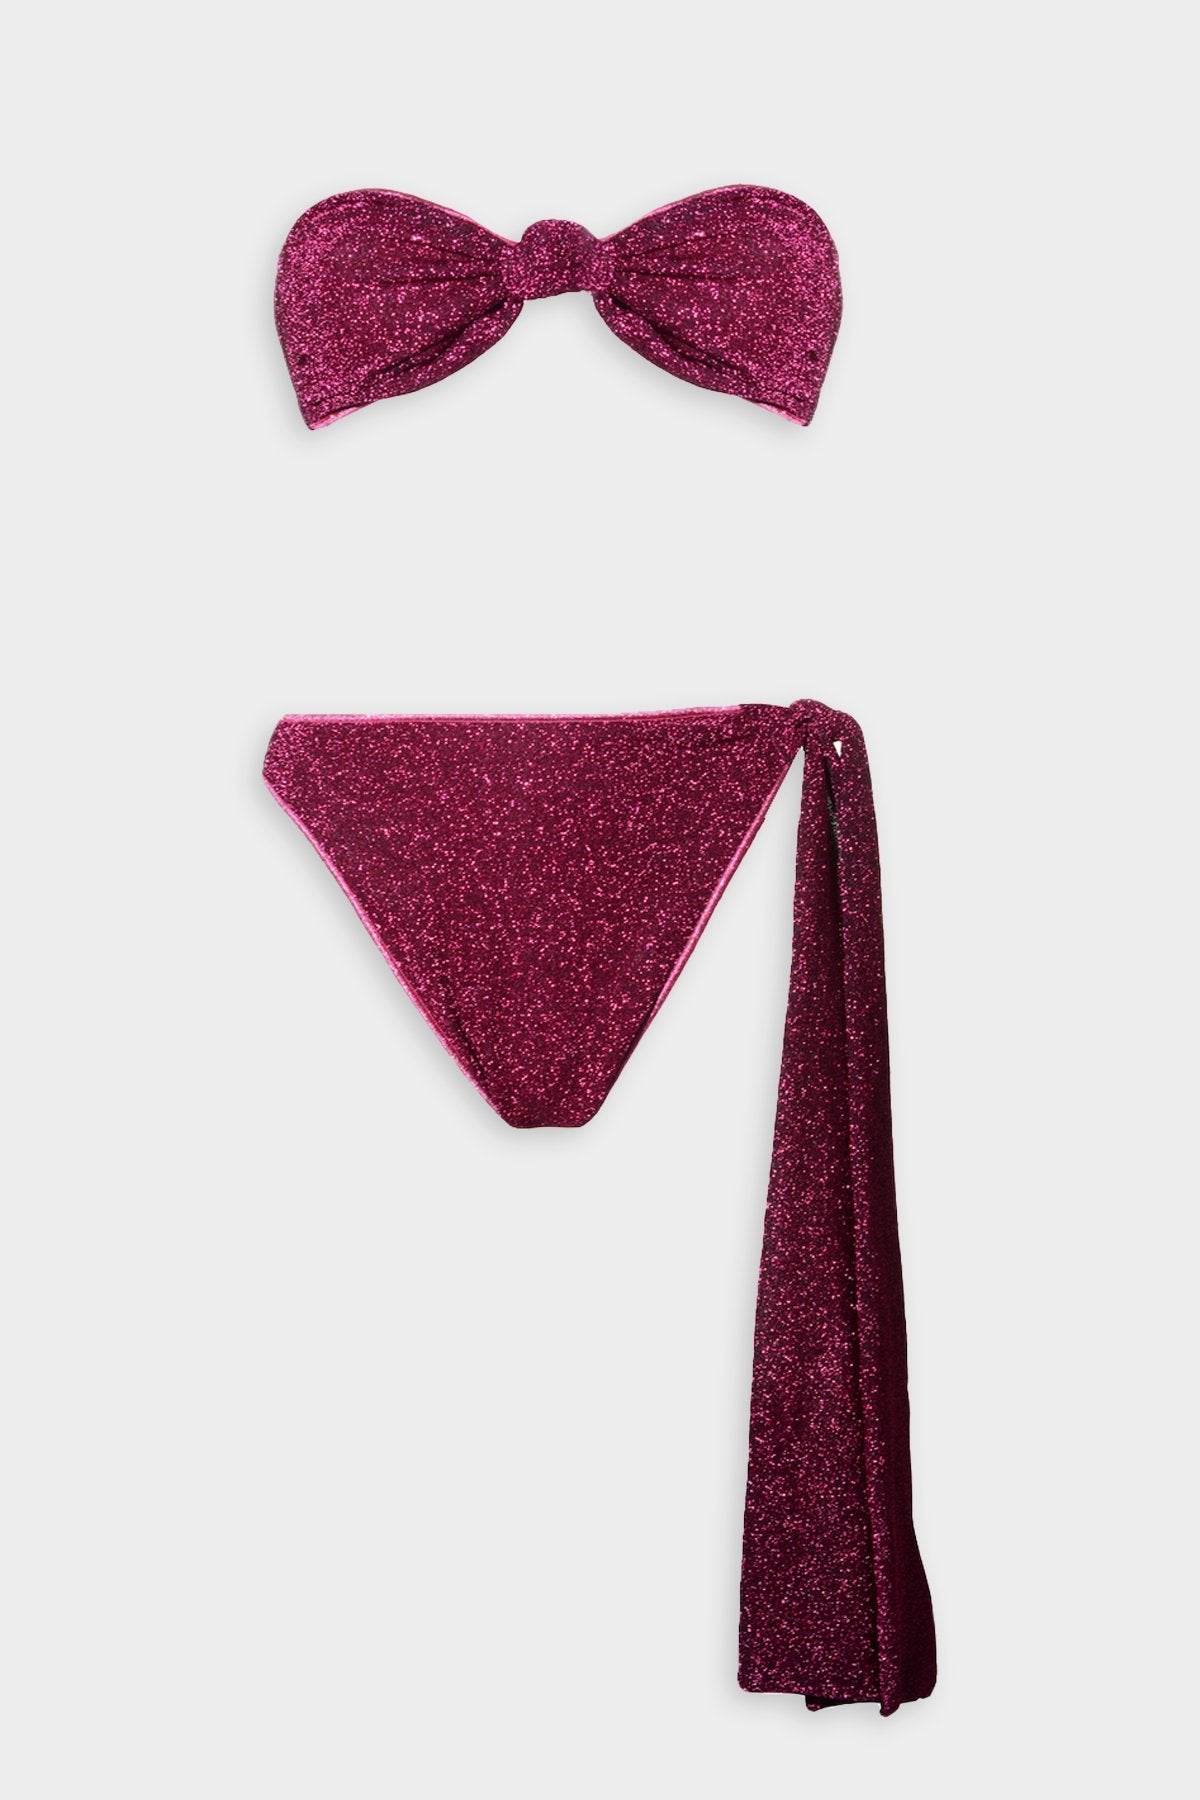 Lumiere Knotted Two Piece in Dark Fucsia - shop-olivia.com